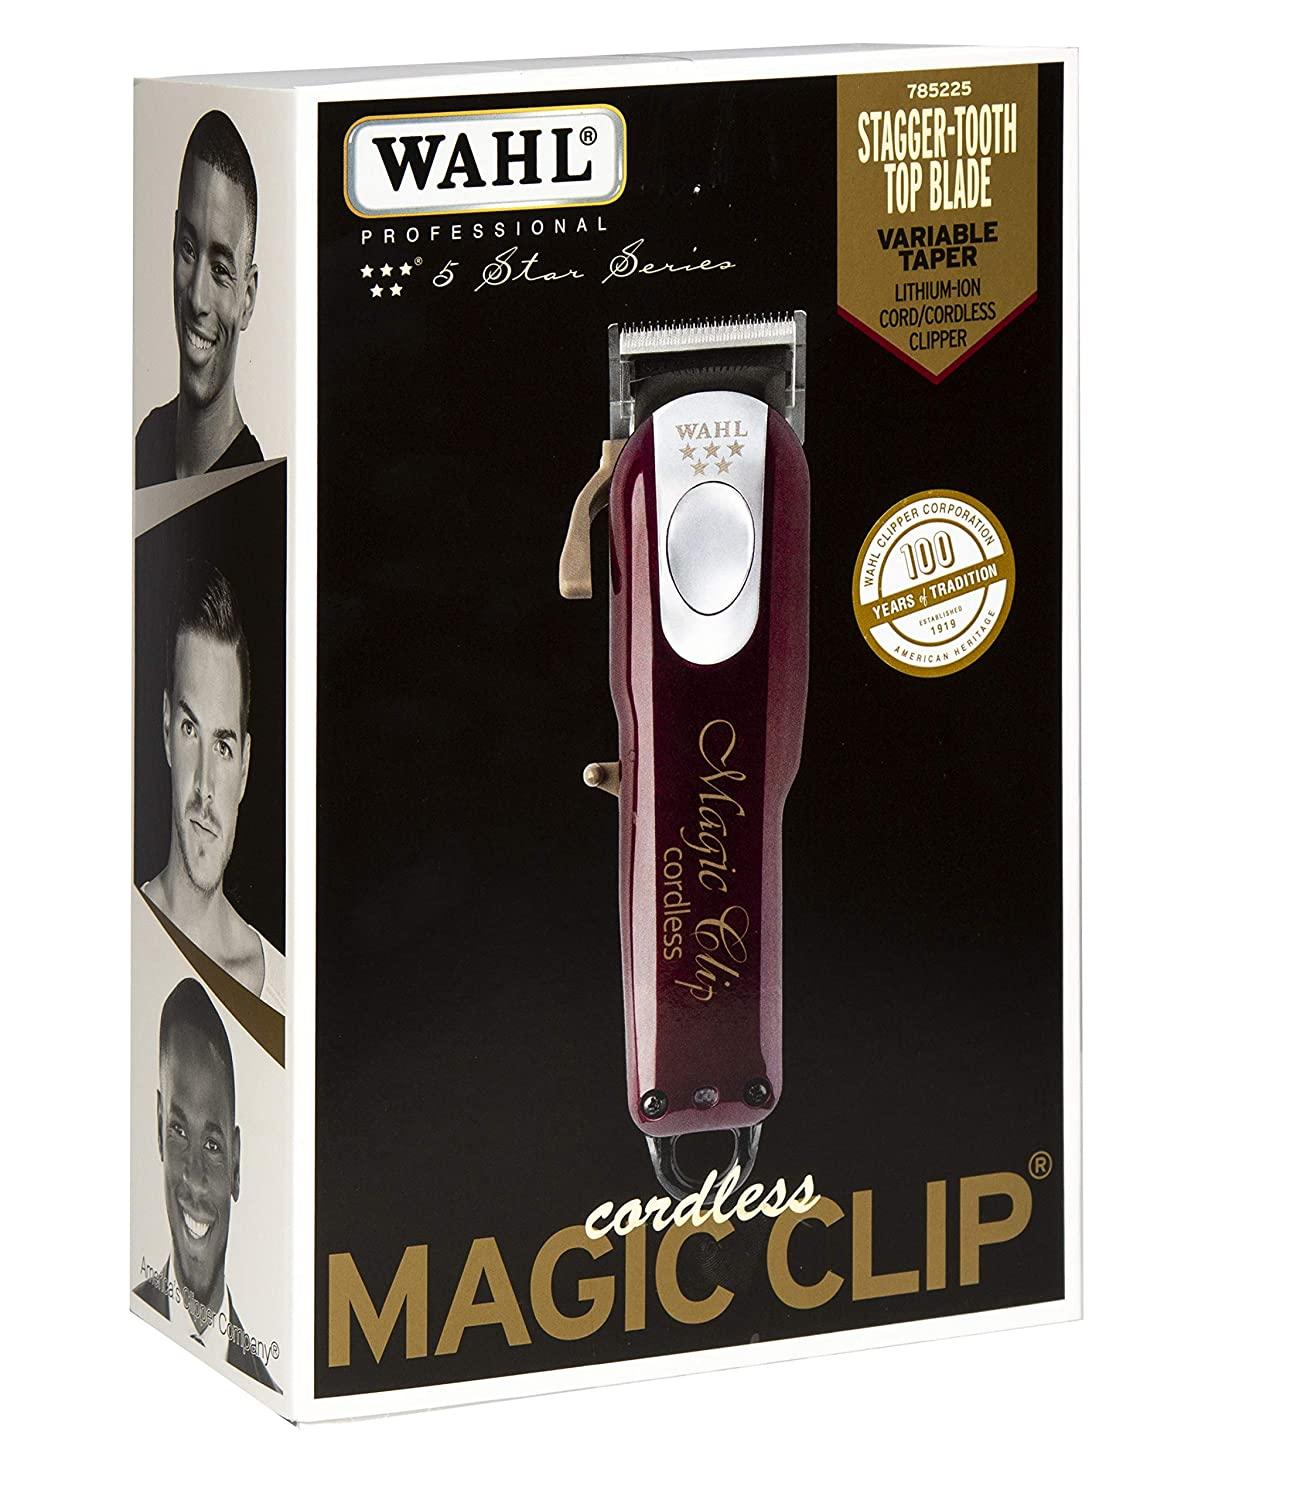 Wahl Professional 5 Star Cordless Magic Clip Hair Clipper with 100